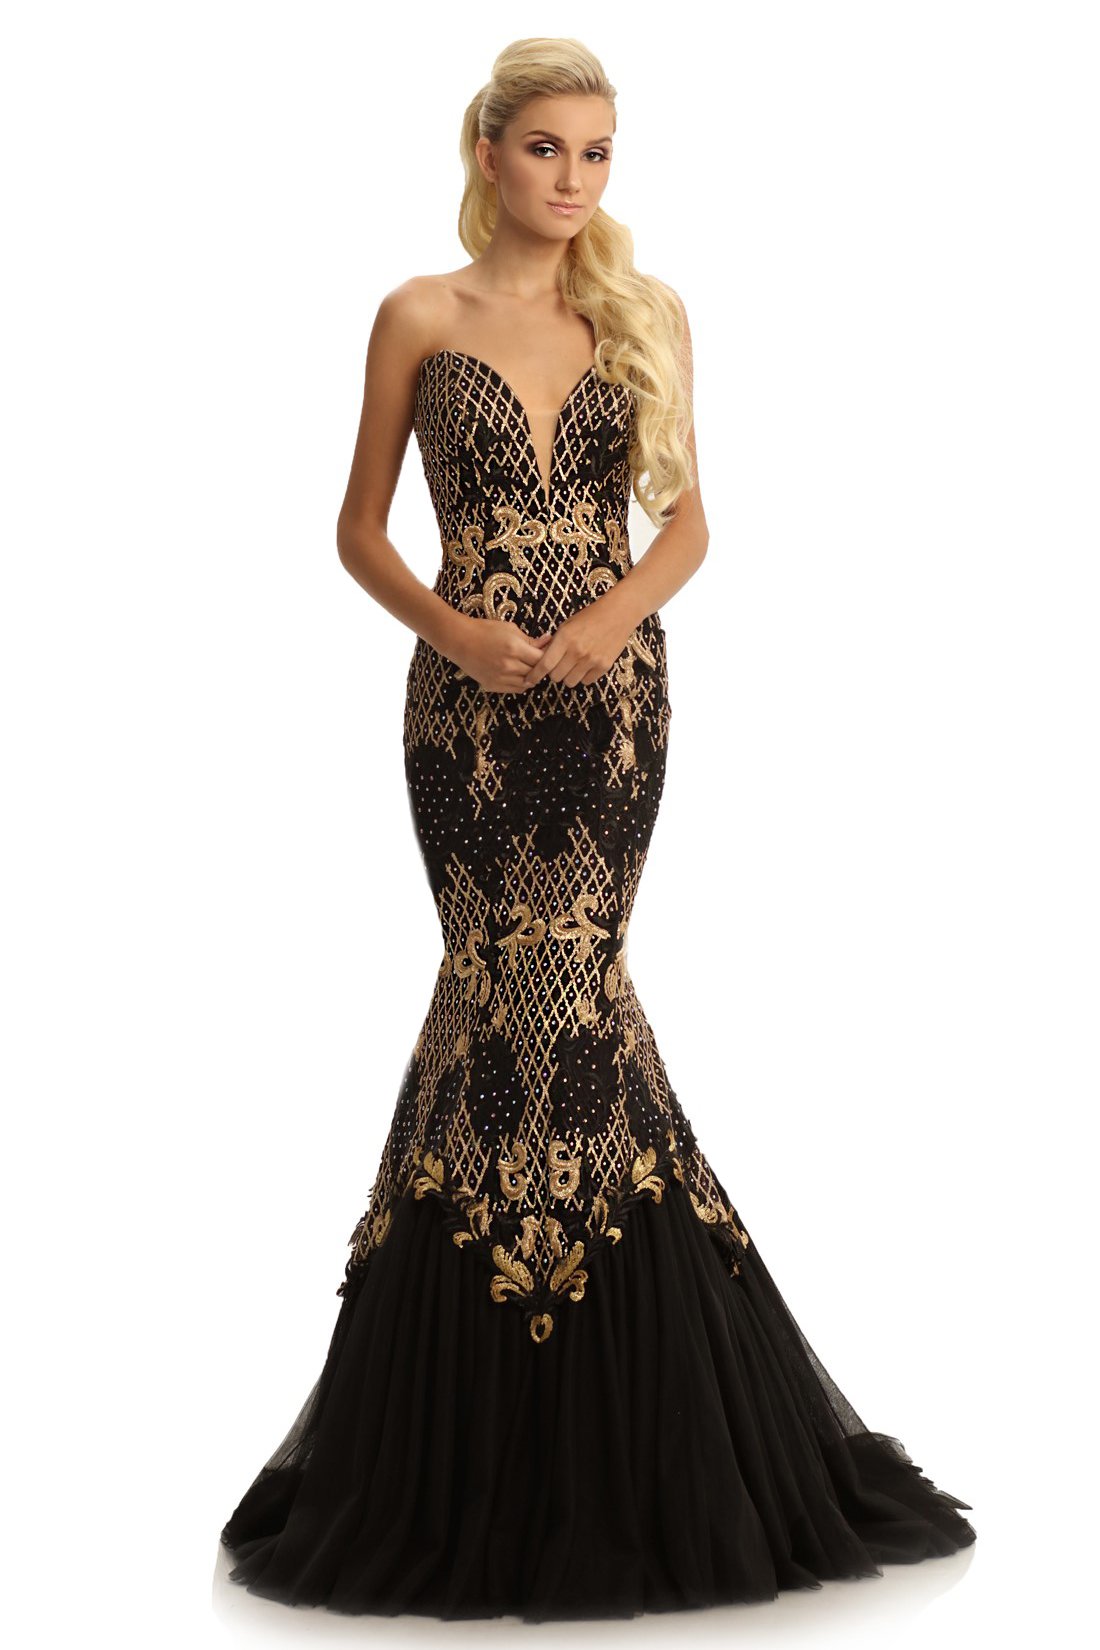 Johnathan Kayne 9001 is a Mermaid Prom Dress, Pageant Gown & Formal Evening Wear. This Classic mermaid gown with V-neck sweetheart bodice designed by Johnathan Kayne. 